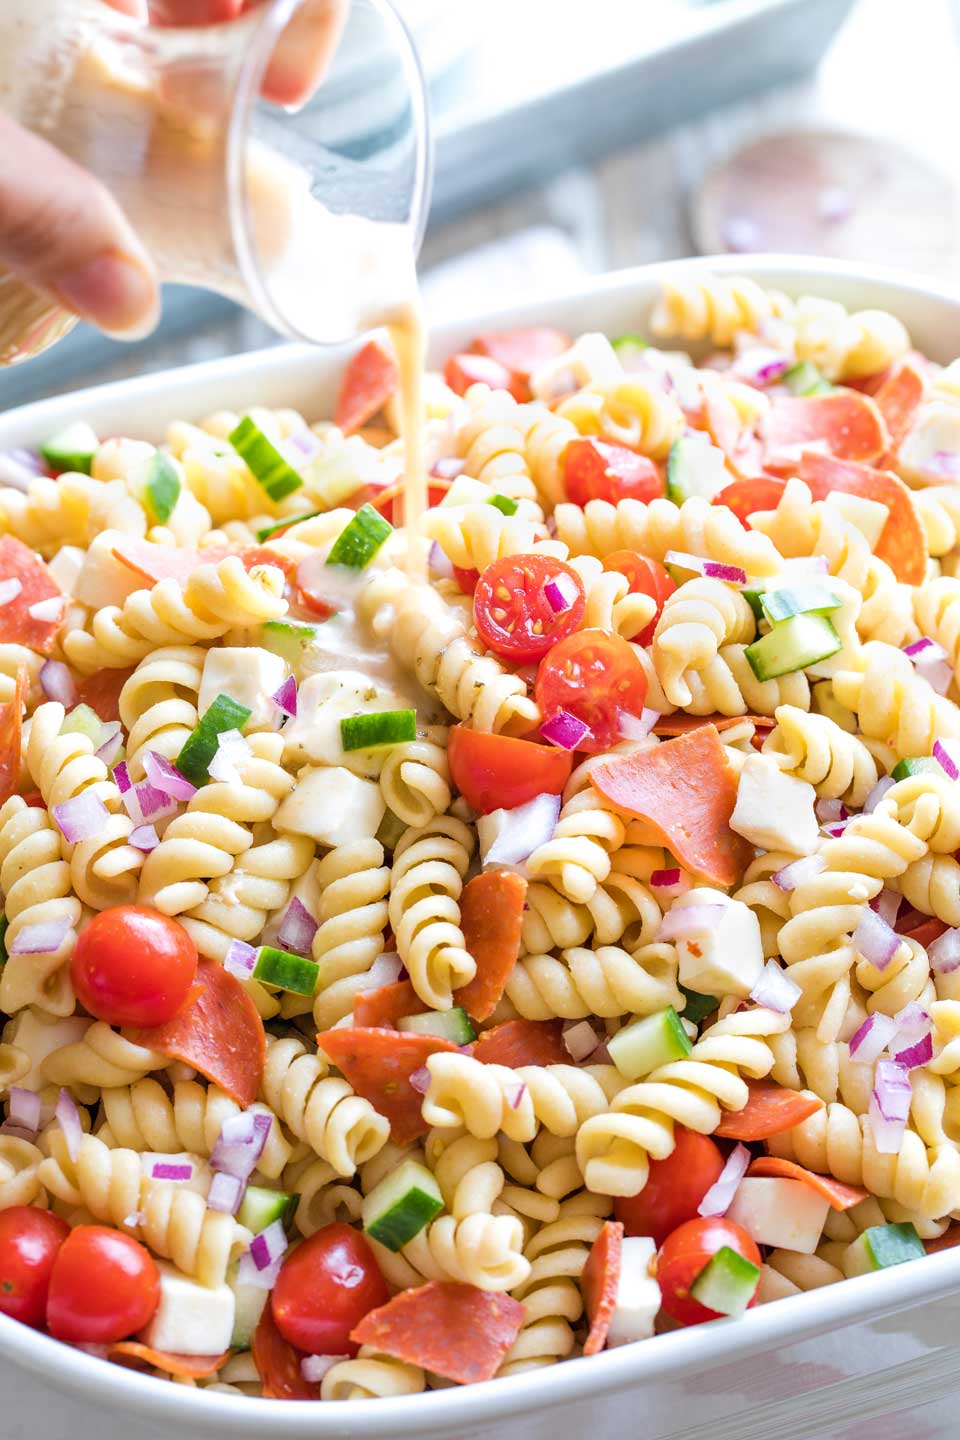 Closeup of the Italian dressing being poured over the mixed-together rotini pasta salad.